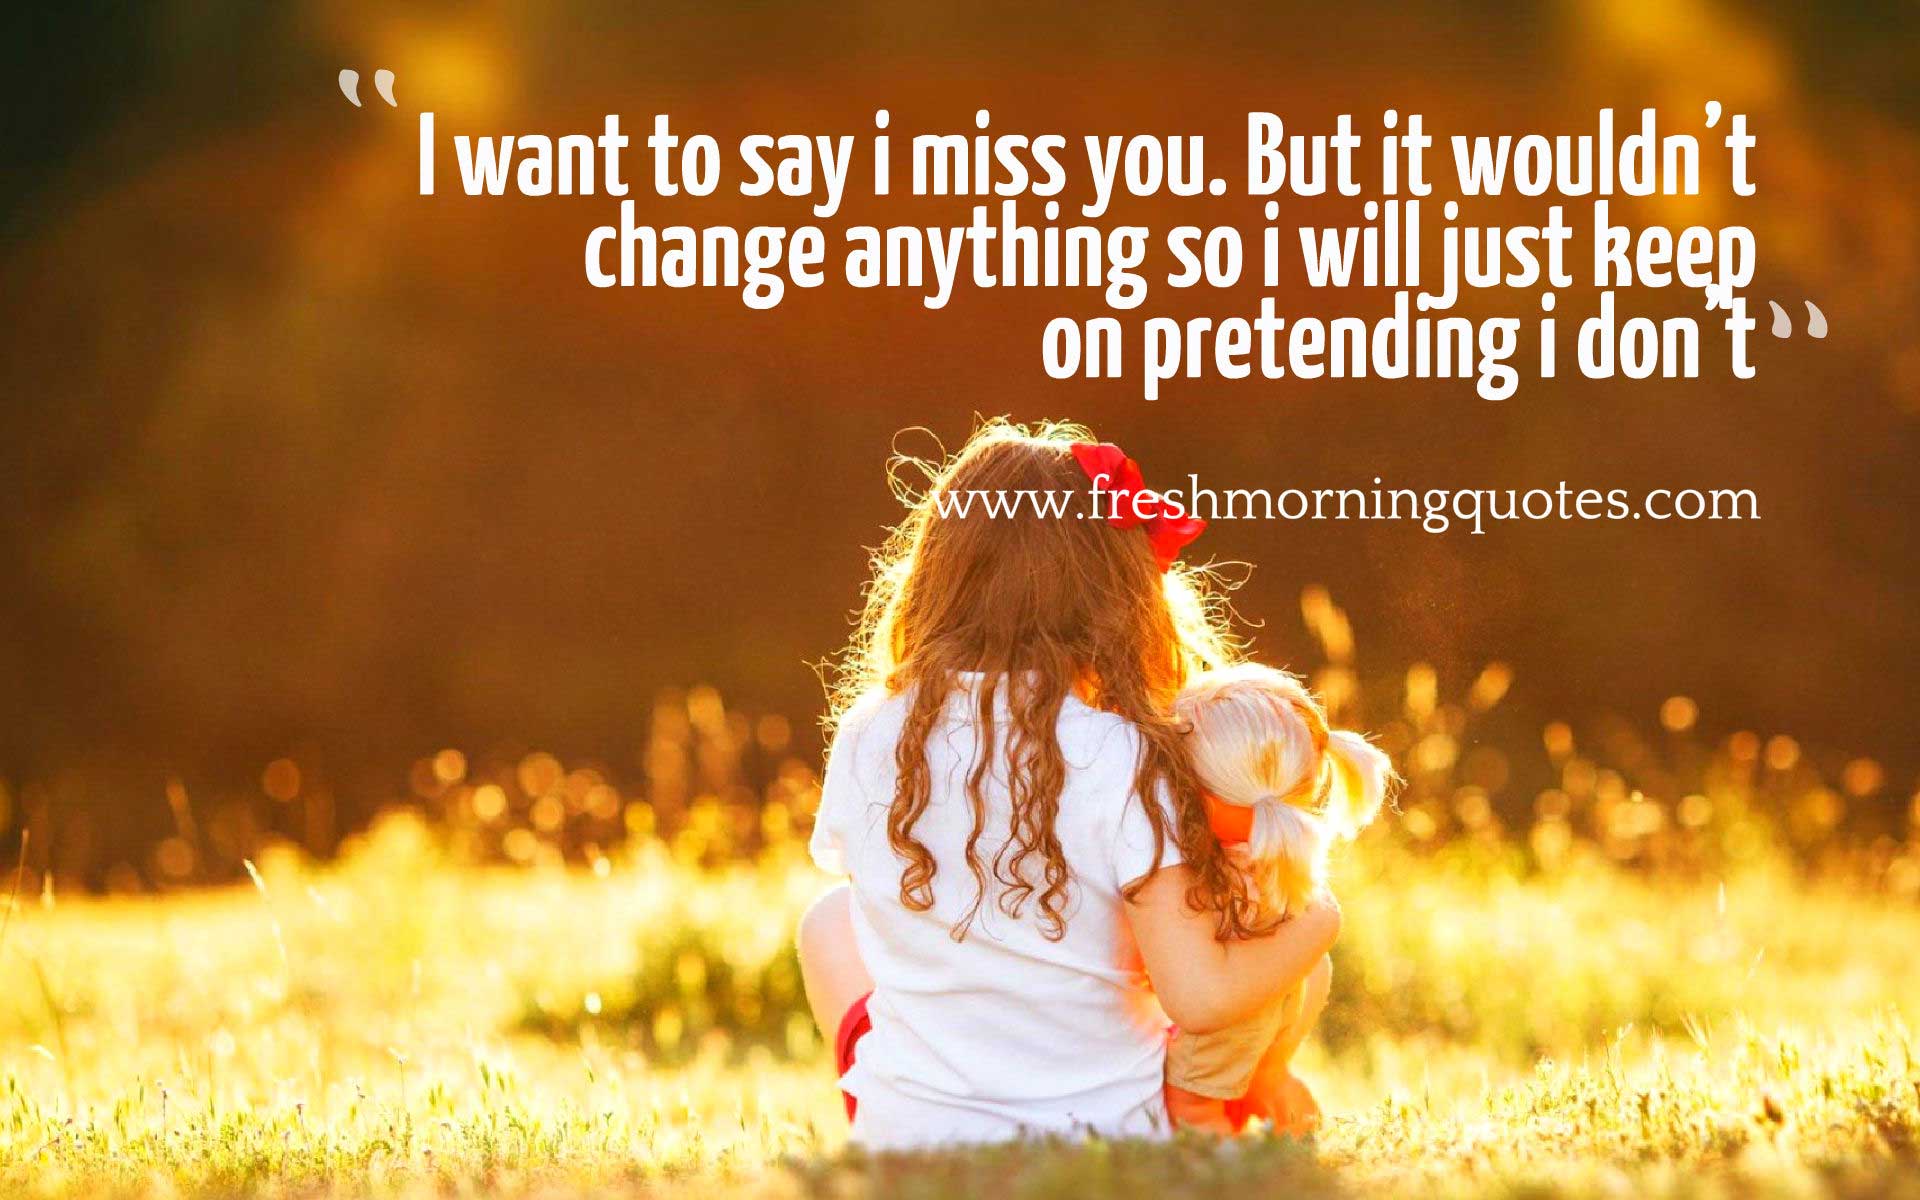 40+ Beautiful Missing You Quotes for your Love